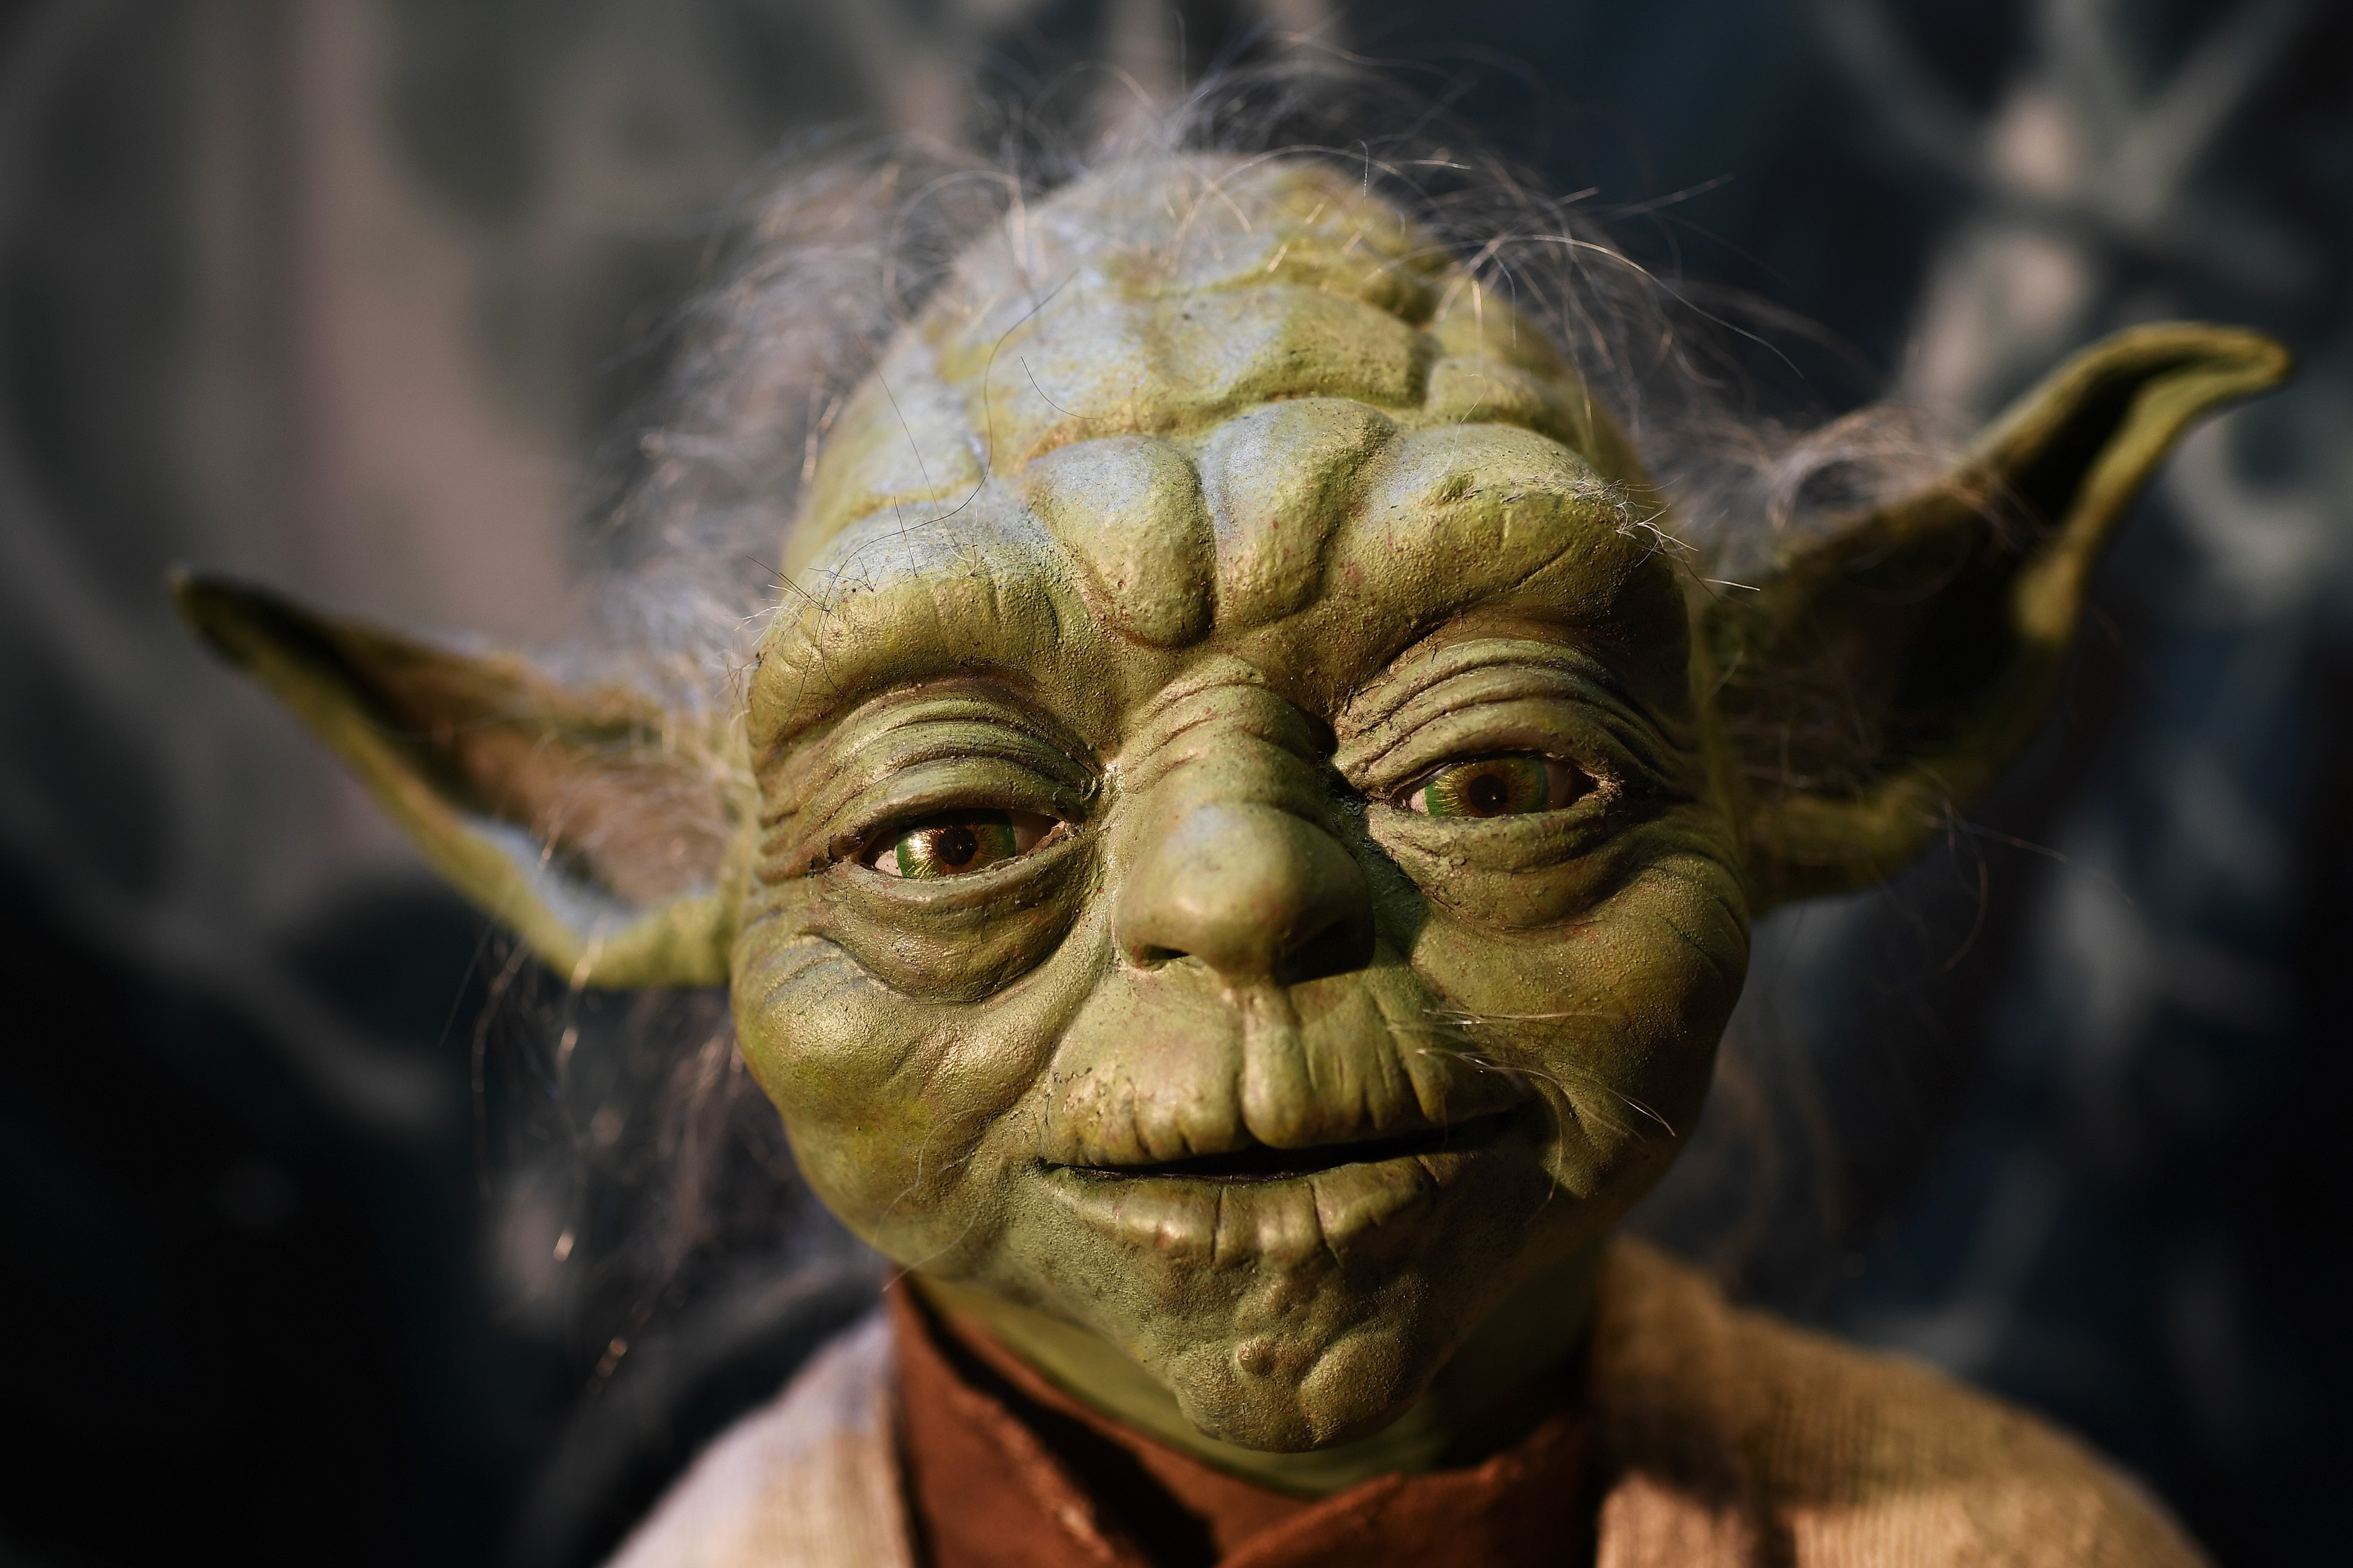 MUNDANE MYSTERIES: What species is Yoda? And is he considered a Muppet?